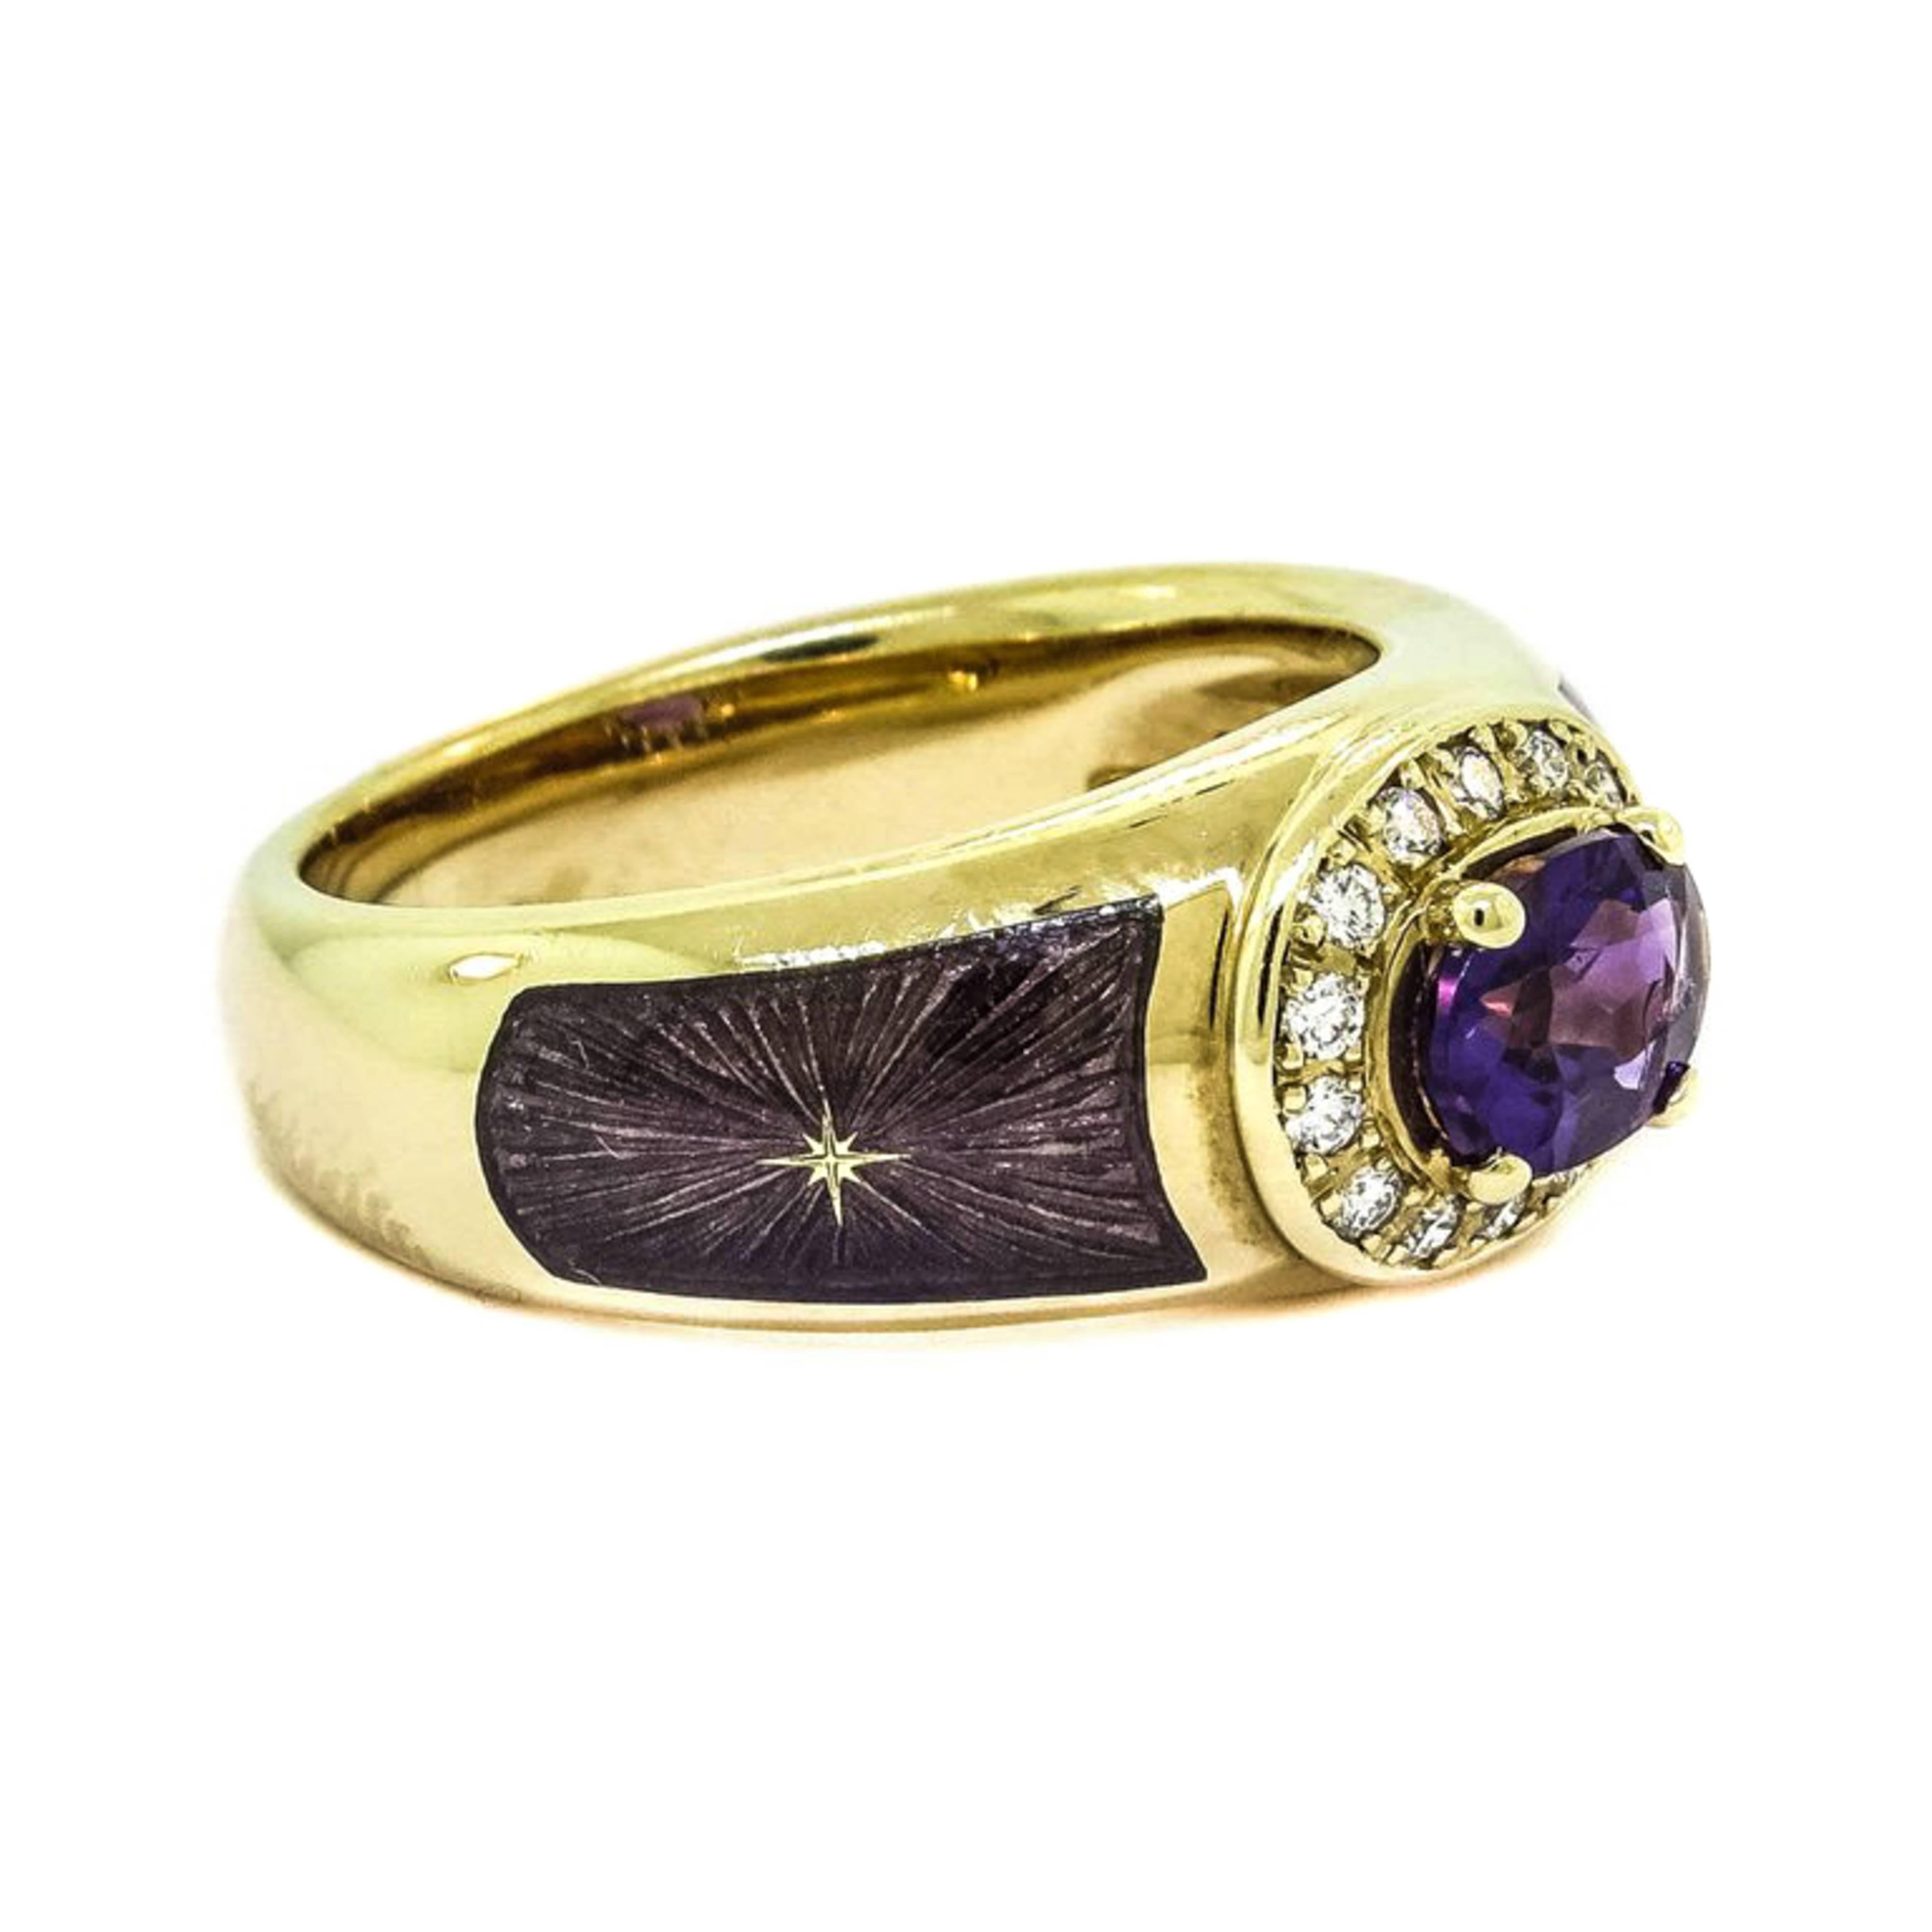 This limited edition ring by Modern Fabergé is crafted in 18 karat yellow gold with enamel sides, centering a gorgeous oval Amethyst.
This is a brand new ring in an original Faberge box and certificate of authenticity.
Finger size 7